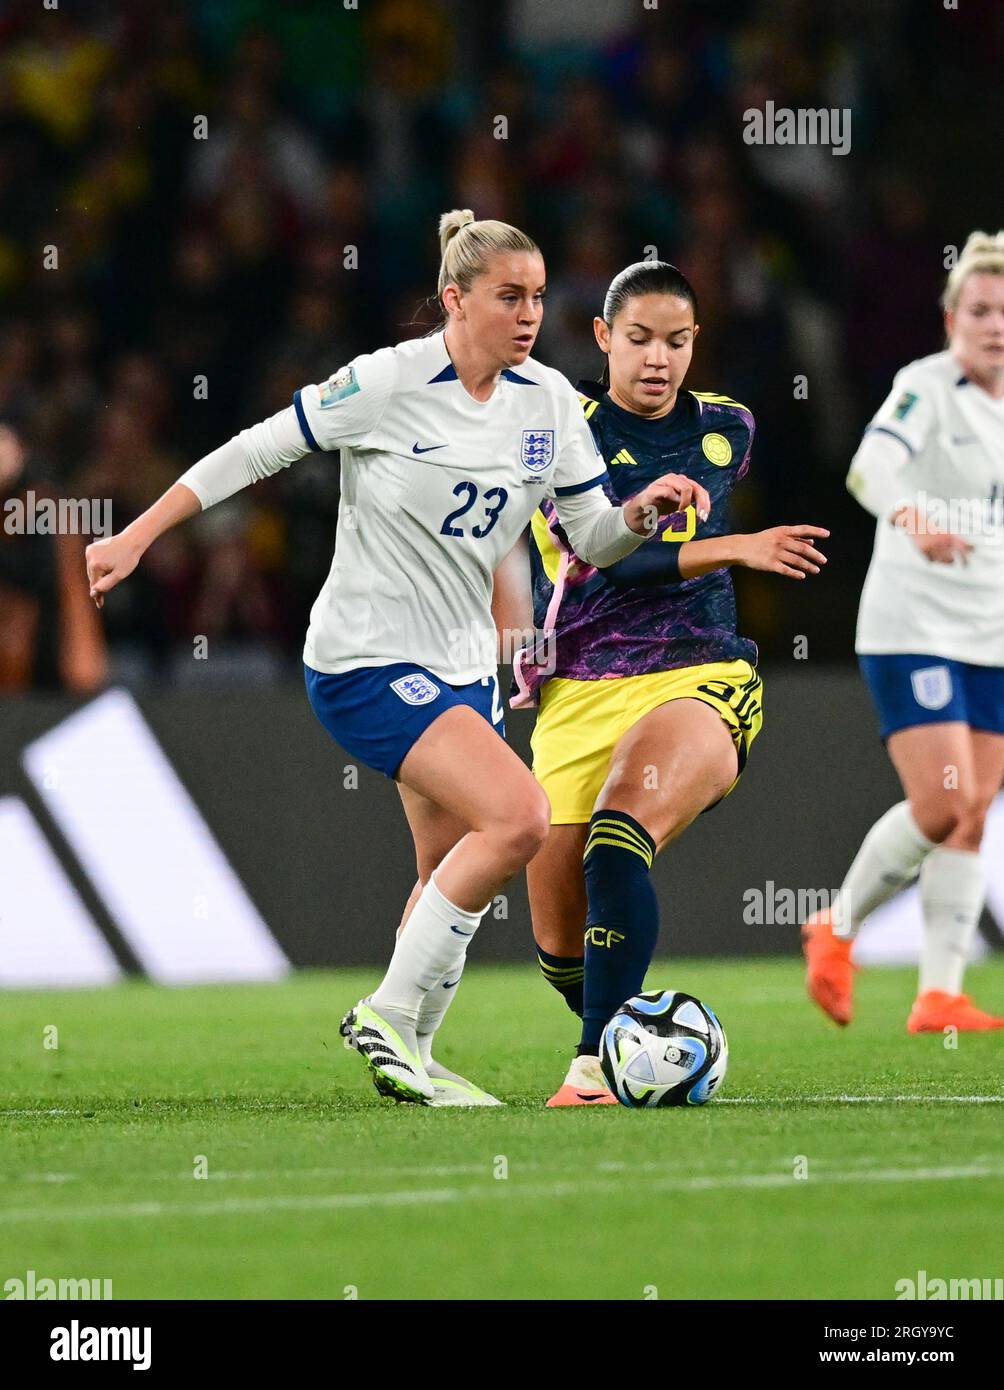 Sydney, Australia. 12th Aug, 2023. Alessia Mia Teresa Russo (L) of England women national soccer team and Lorena Bedoya Durango (R) of Colombia women national soccer team are seen in action during the FIFA Women's World Cup 2023 match between England and Colombia held at the Stadium Australia. Finals score England 2:1 Colombia (Photo by Luis Veniegra/SOPA Images/Sipa USA) Credit: Sipa USA/Alamy Live News Stock Photo